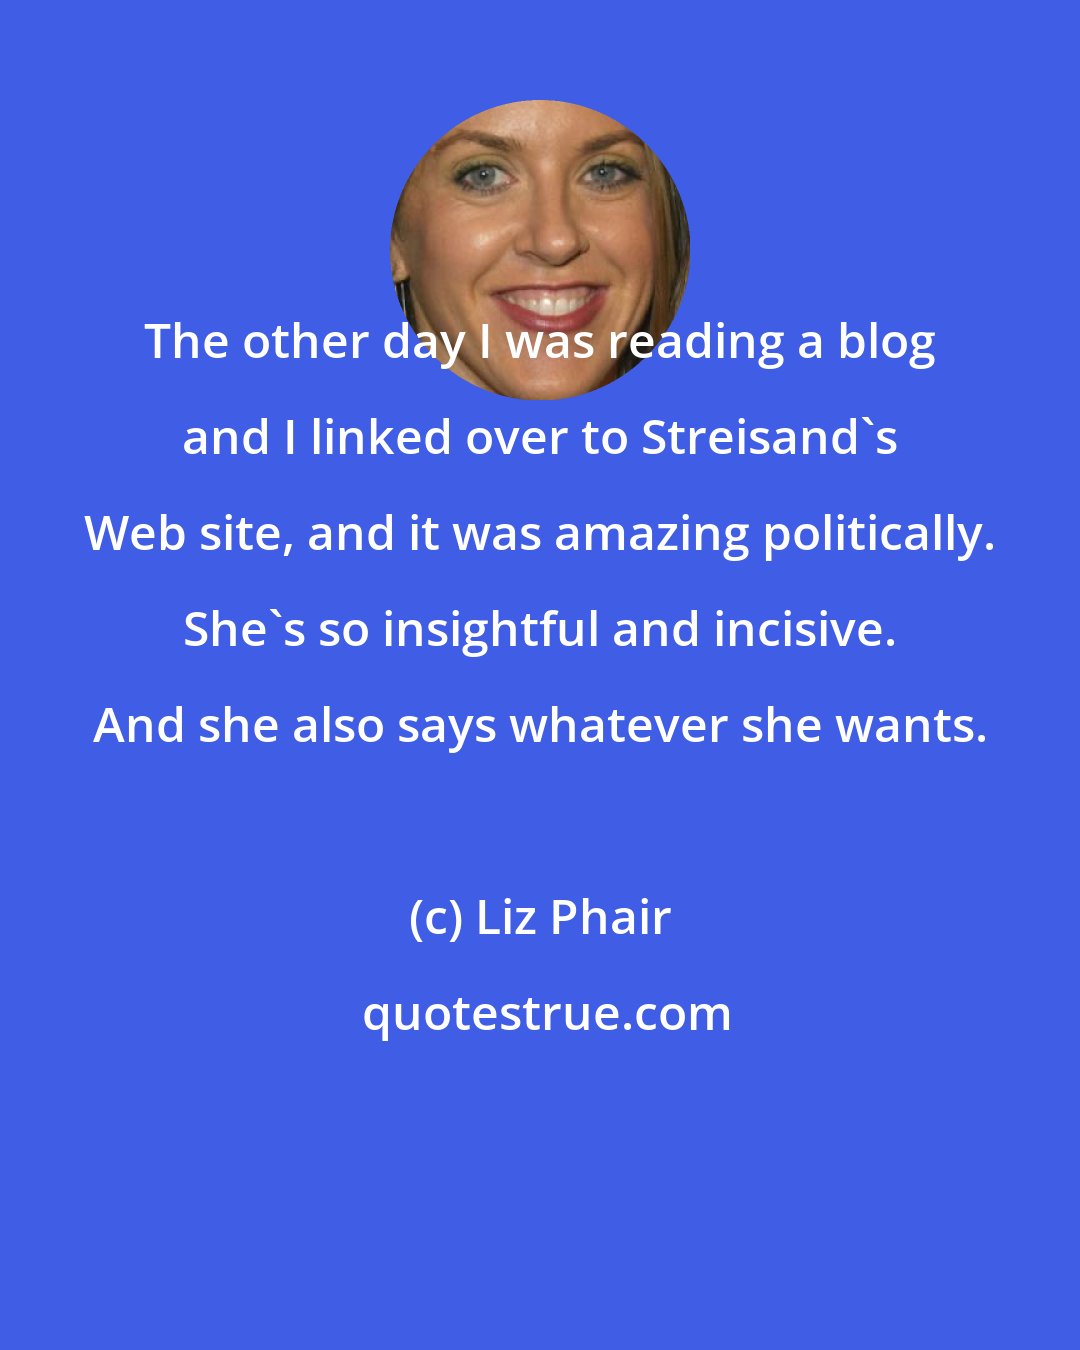 Liz Phair: The other day I was reading a blog and I linked over to Streisand's Web site, and it was amazing politically. She's so insightful and incisive. And she also says whatever she wants.